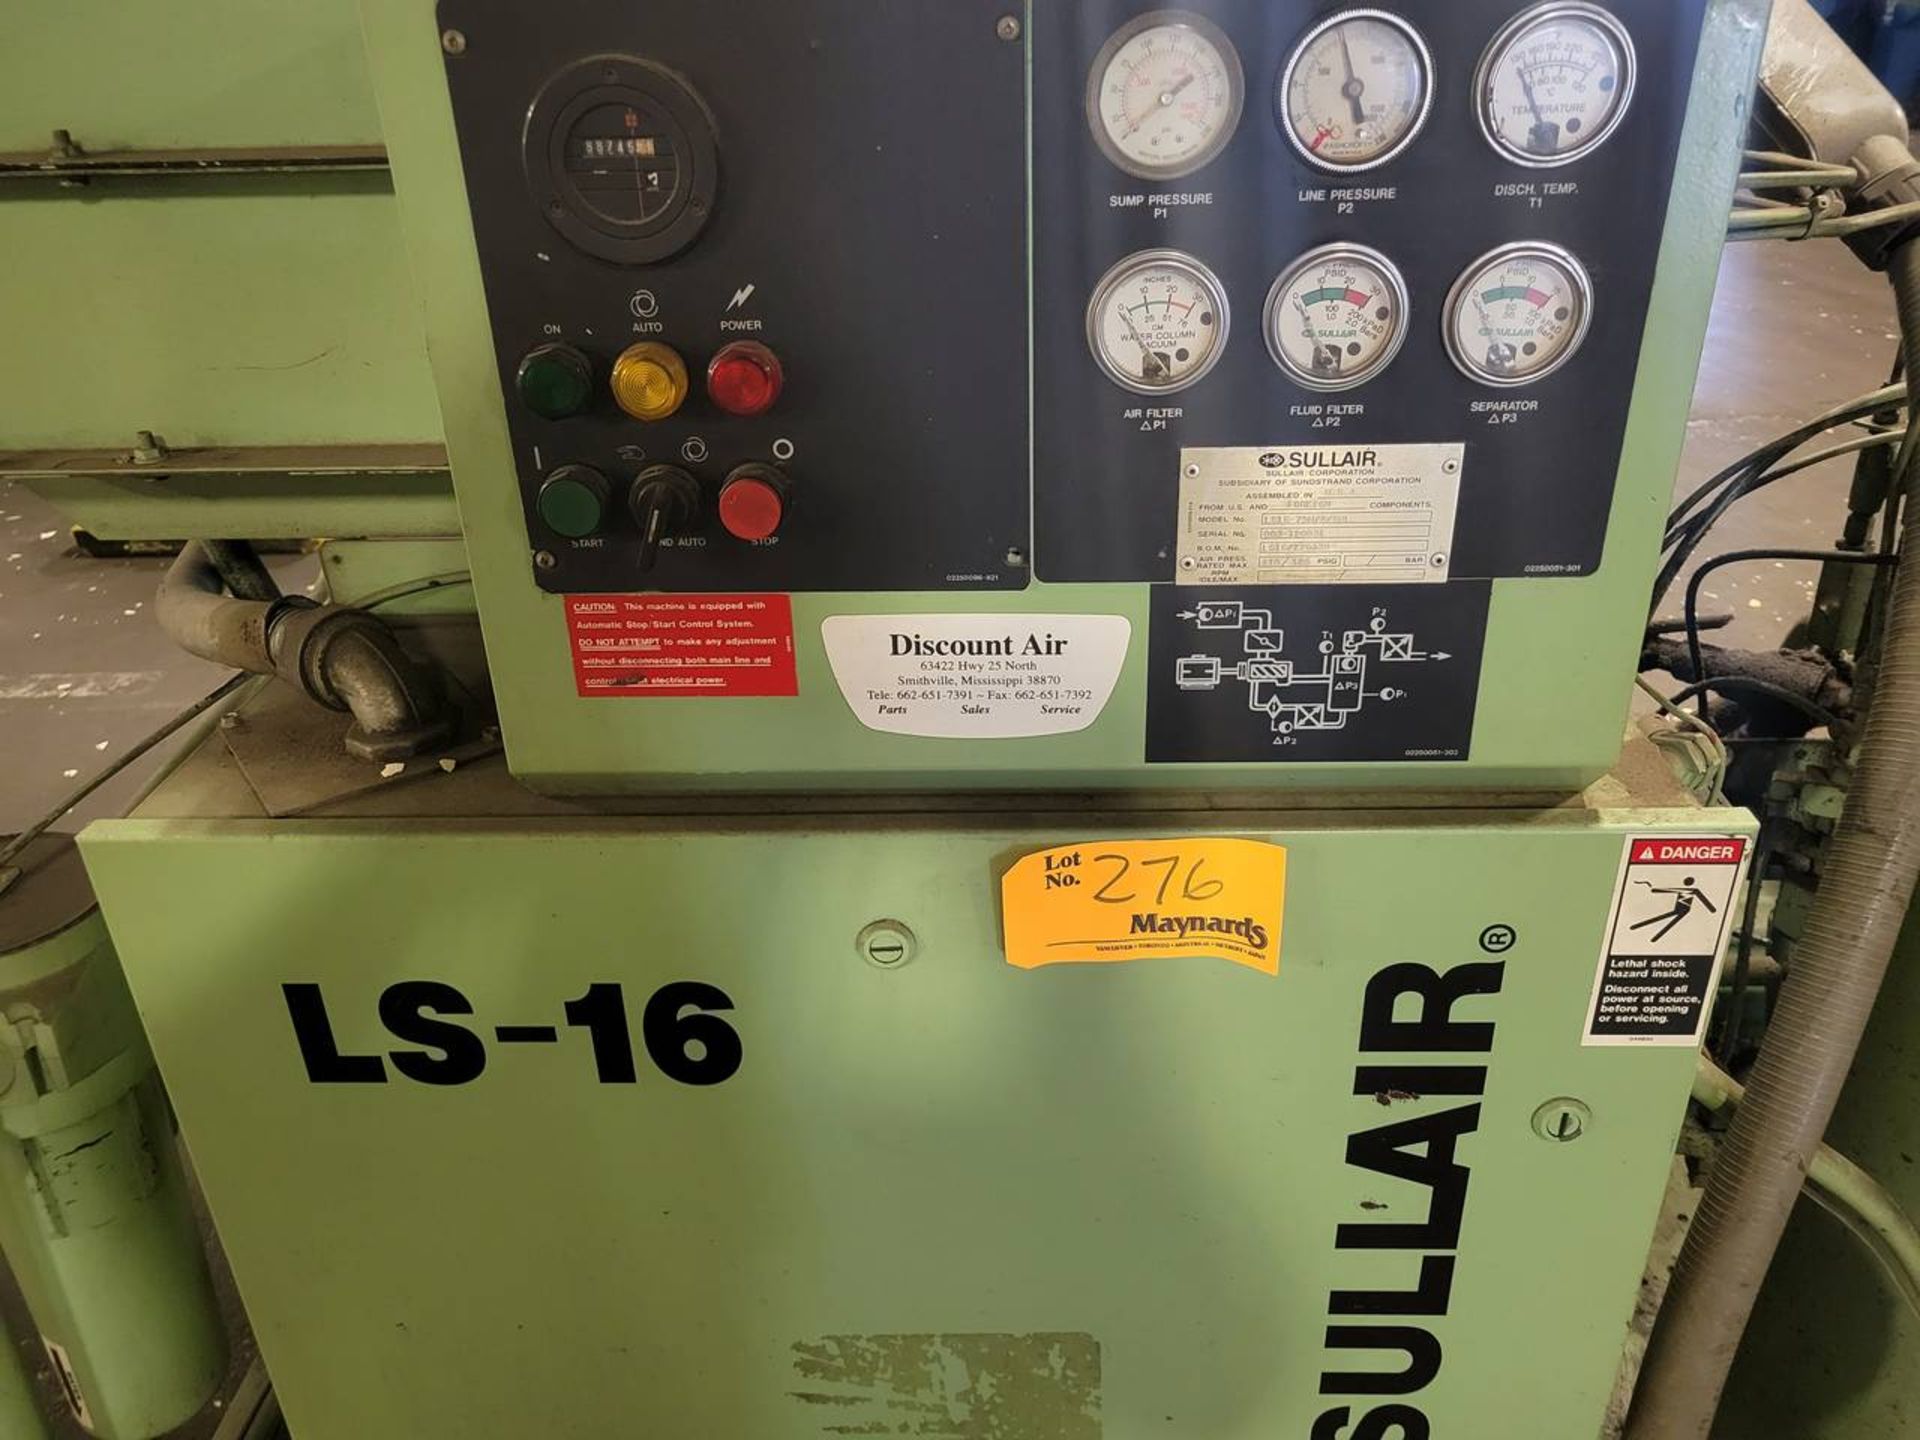 Sullair LS-16 75 hp rotary screw air compressor, - Image 2 of 8